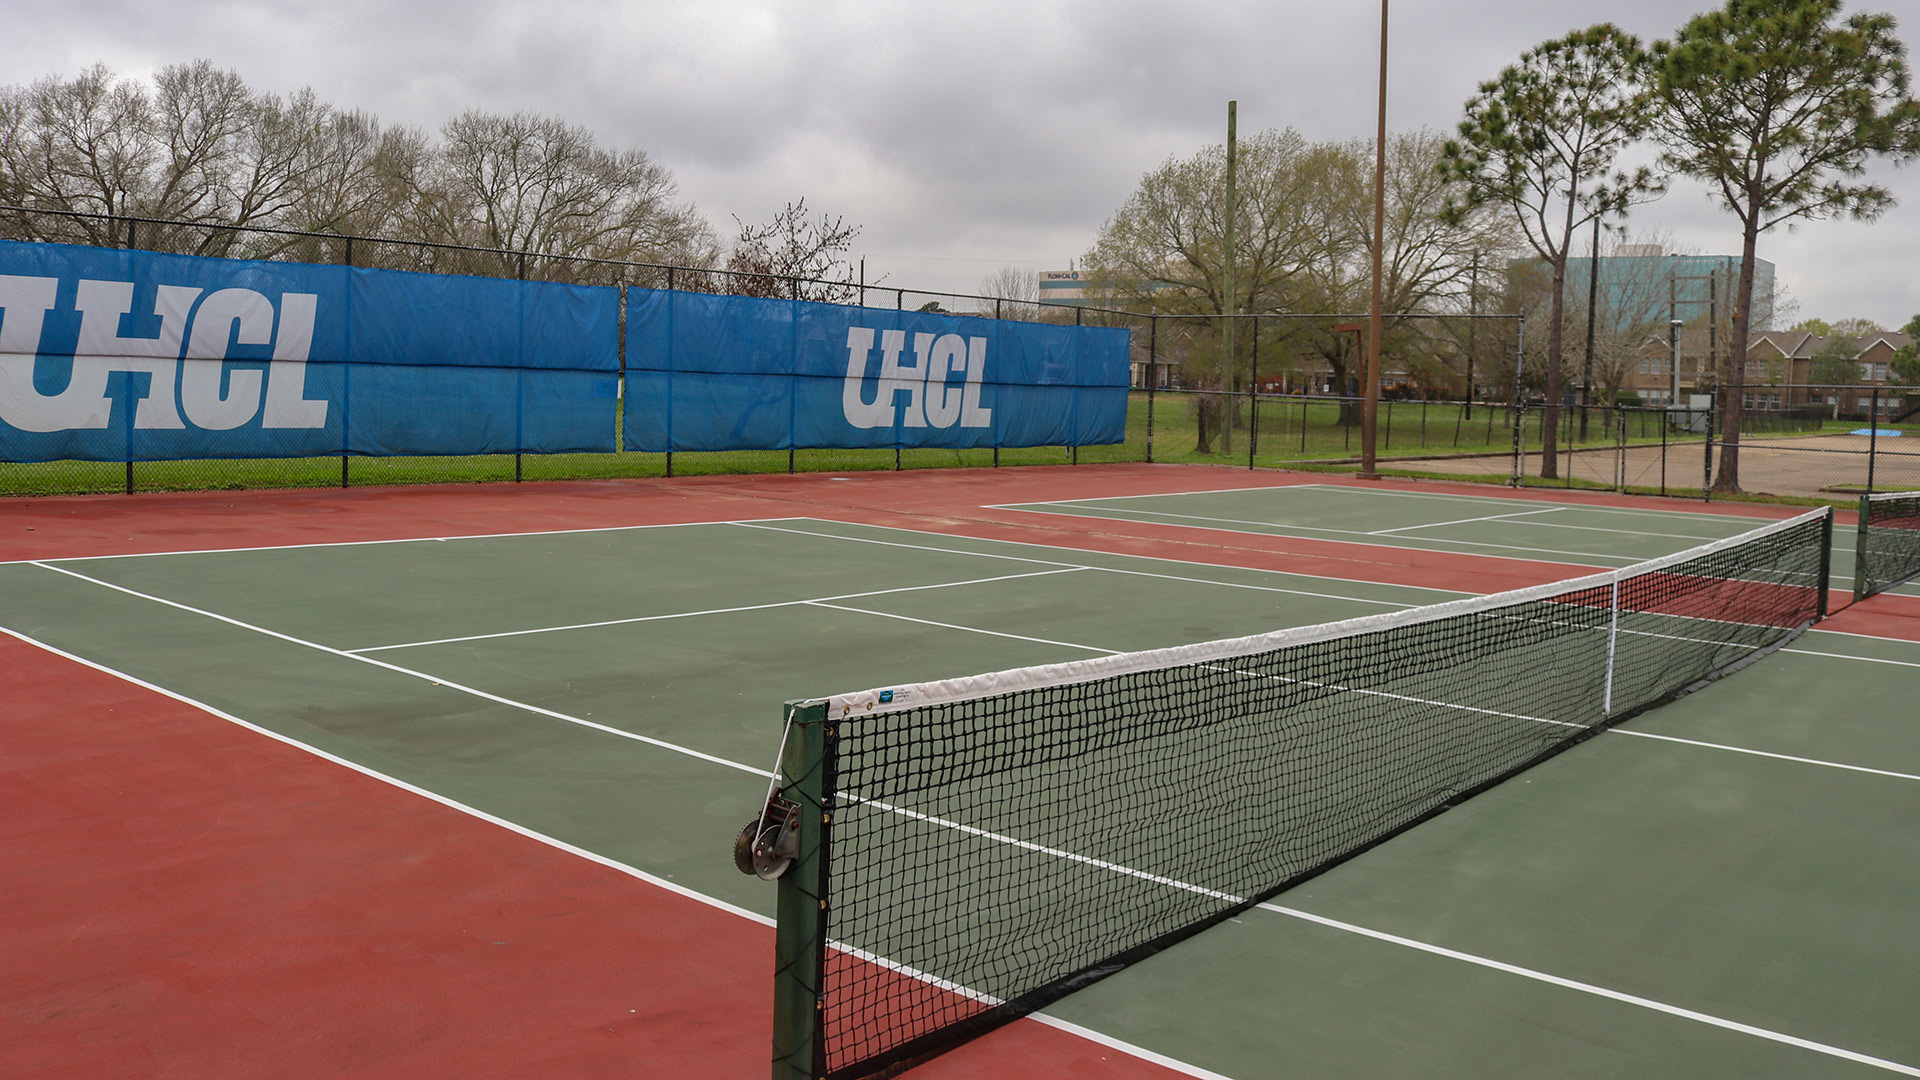 Outdoor tennis courts at the Delta Field Complex